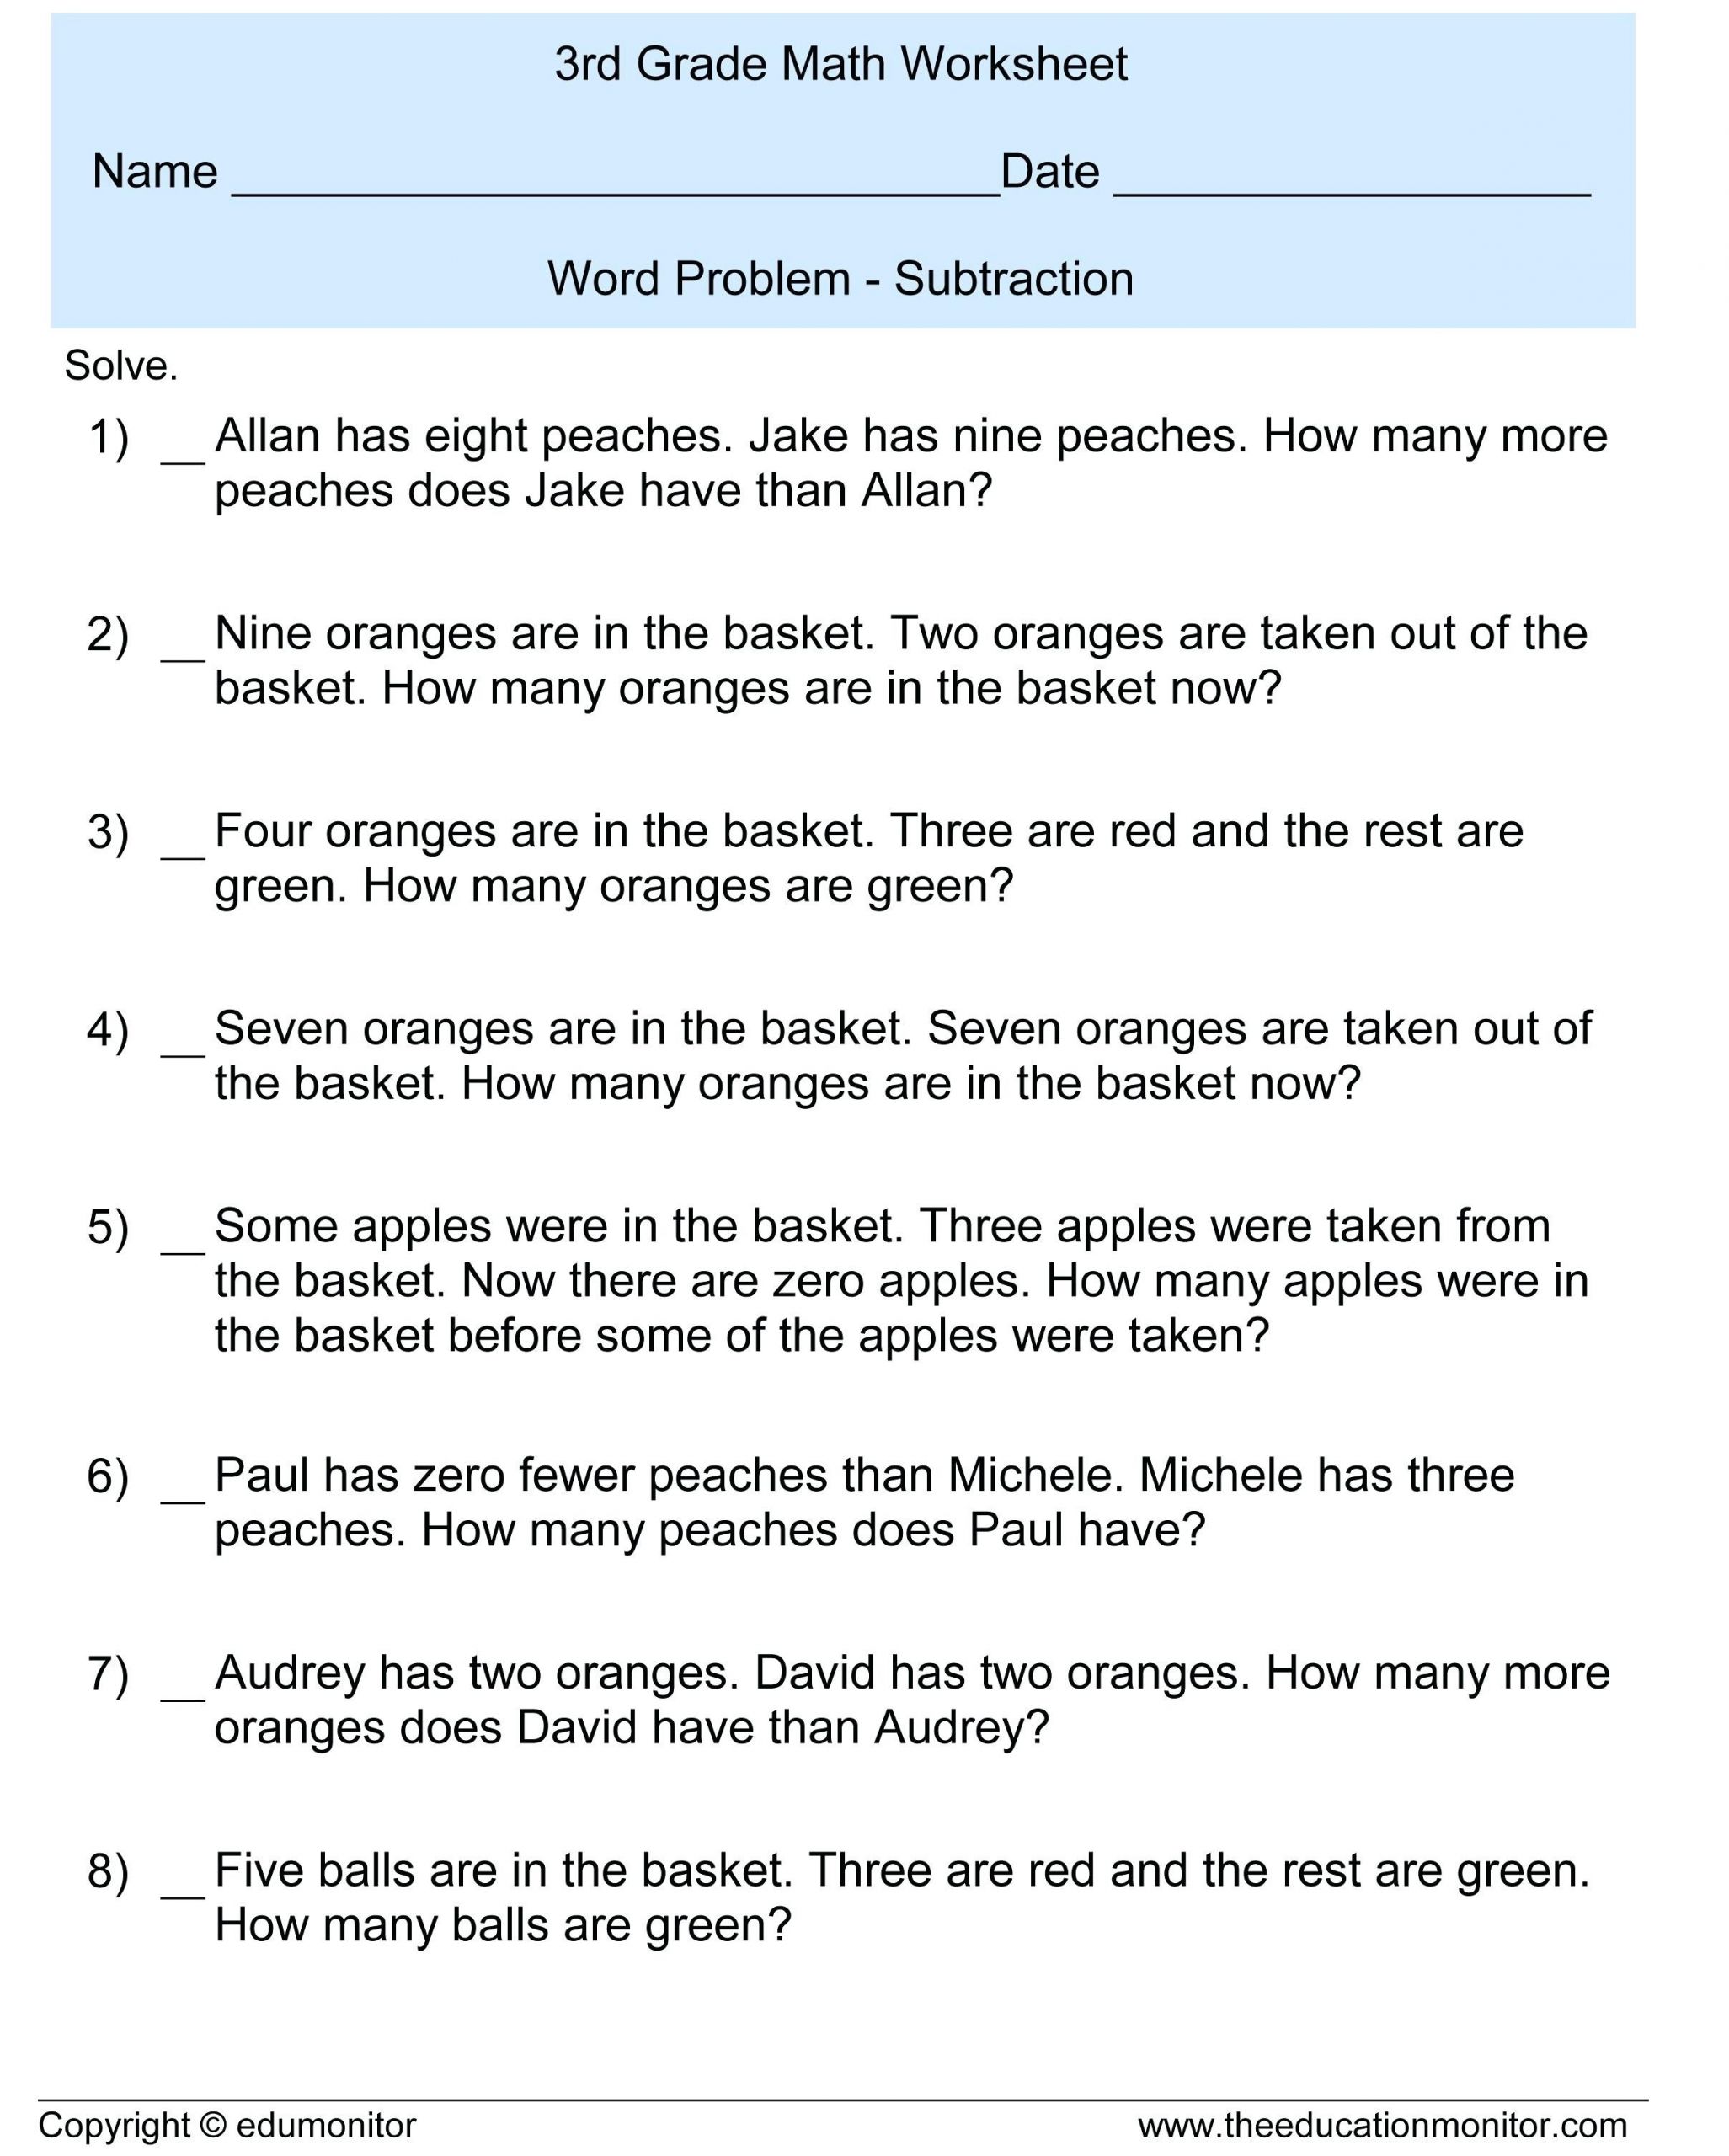 Free Math Worksheets Third Grade 3 Addition Word Problems